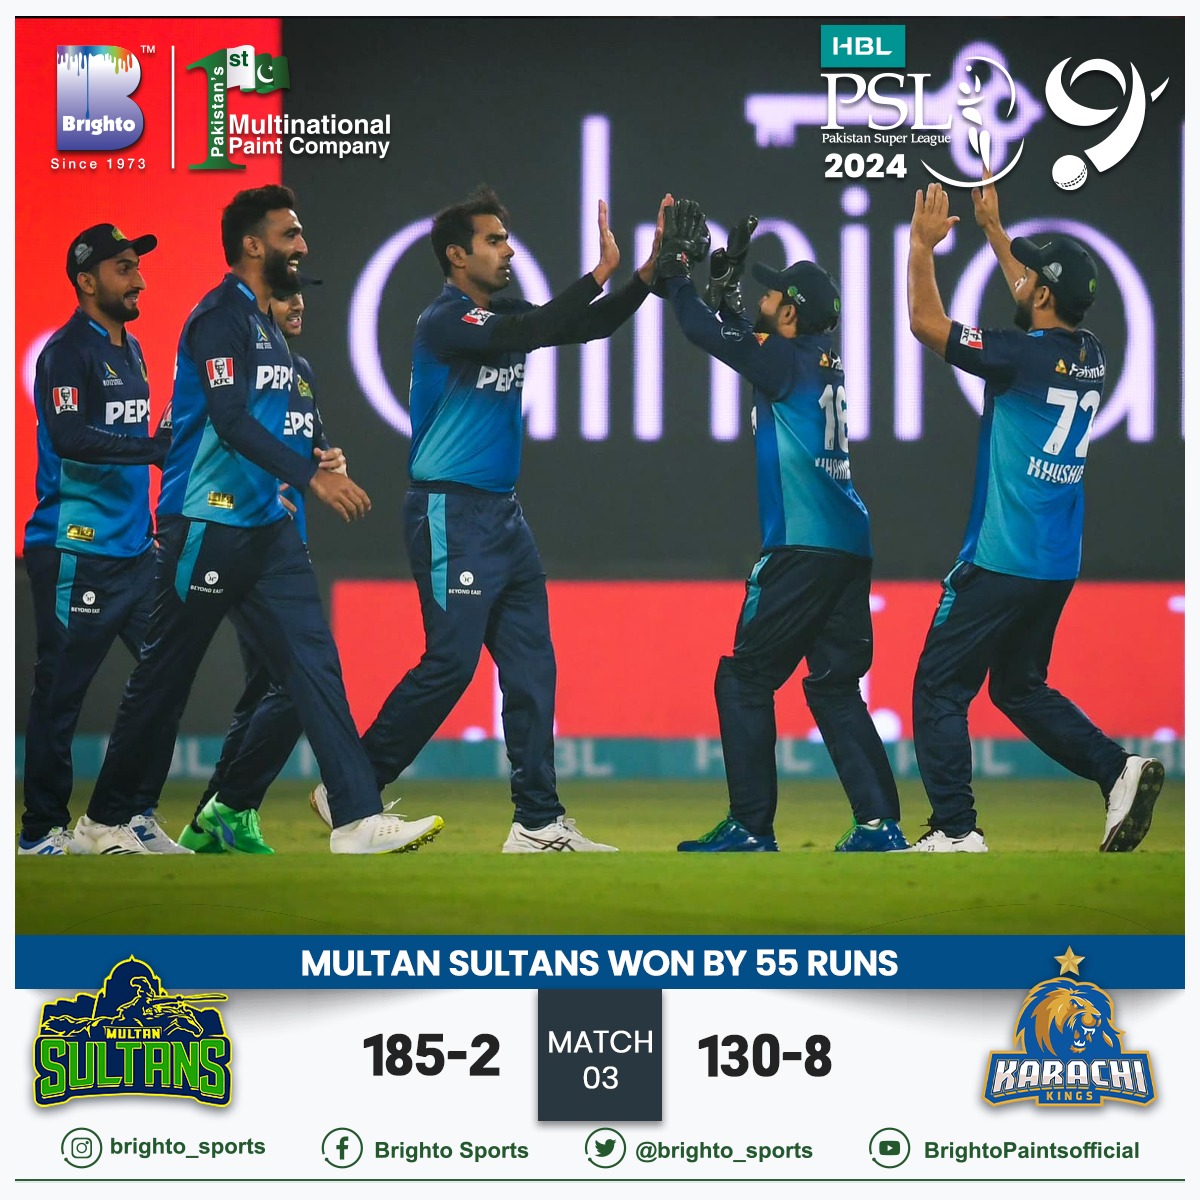 Multan Sultans won the match by 55 runs and defeated team Karachi Kings in the 3rd match of PSL 9.
#BrightoPaints #Brightoturns50 #BrightoGroup #Since1973 #BrightoSports #PSL9 #PSL2024 #Pakistan #cricketfever #50YearsOfExcellence #winner